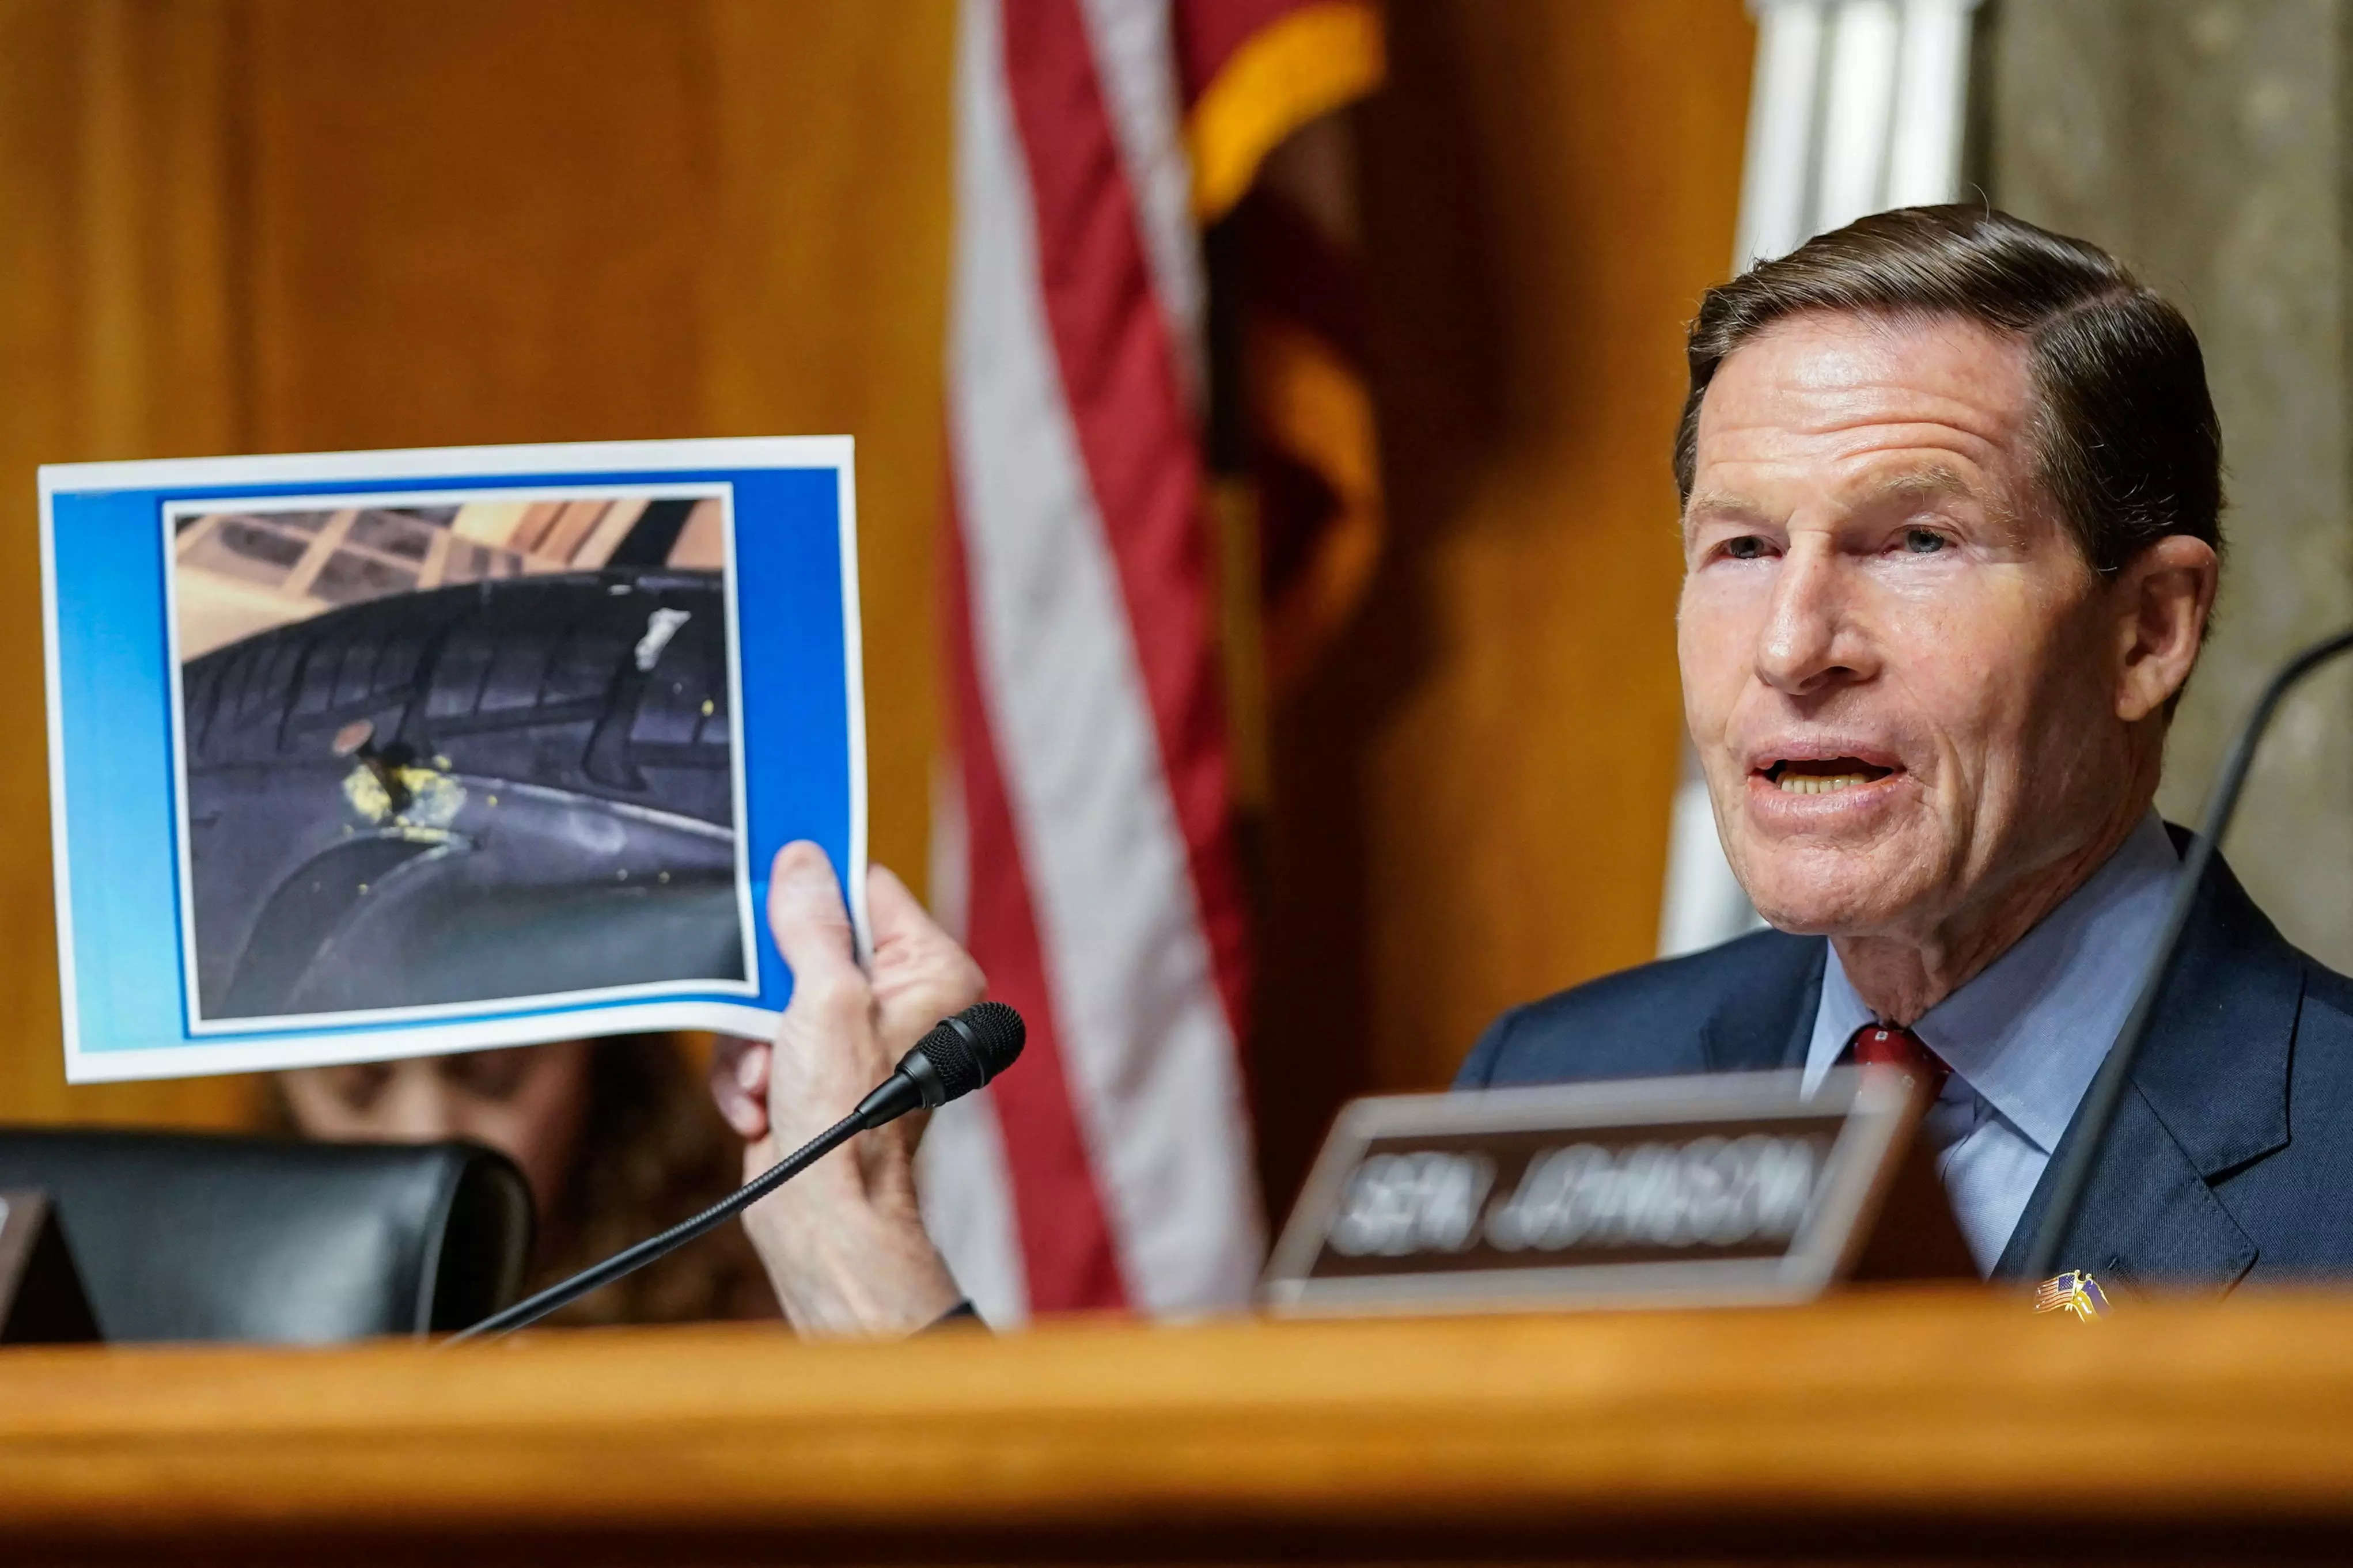 Committee Chairman, US Senator Richard Blumenthal, Democrat of Connecticut, holds a picture of a nail in a tire that Boeing engineer, Sam Salehpour said he believes was placed intentionally in his car tire as retaliation for being a whistleblower.